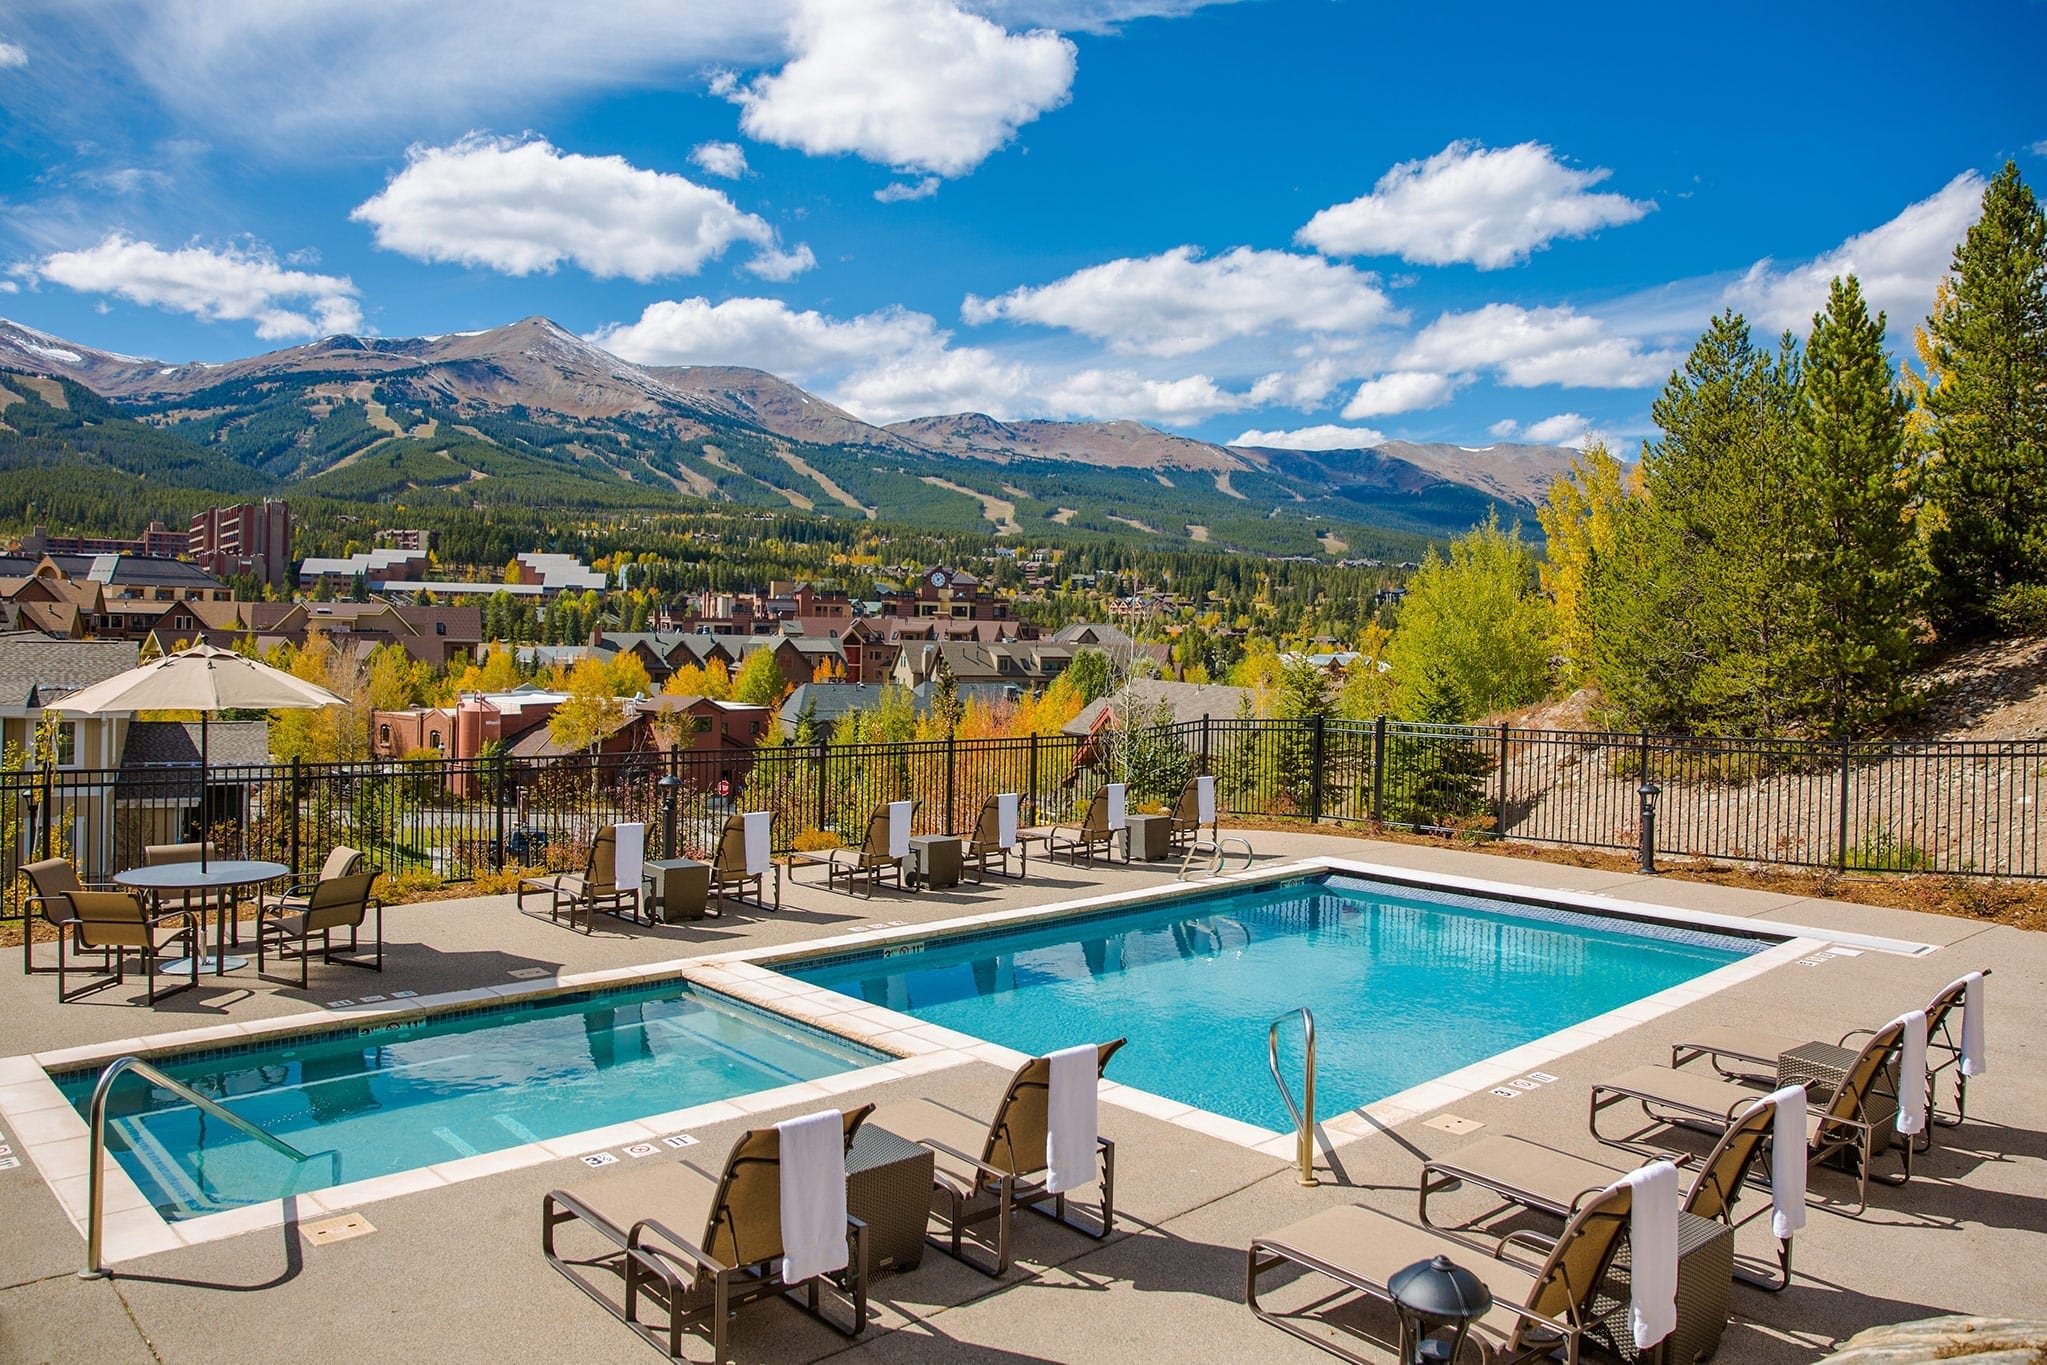 Residence Inn Pool with views of the mountains